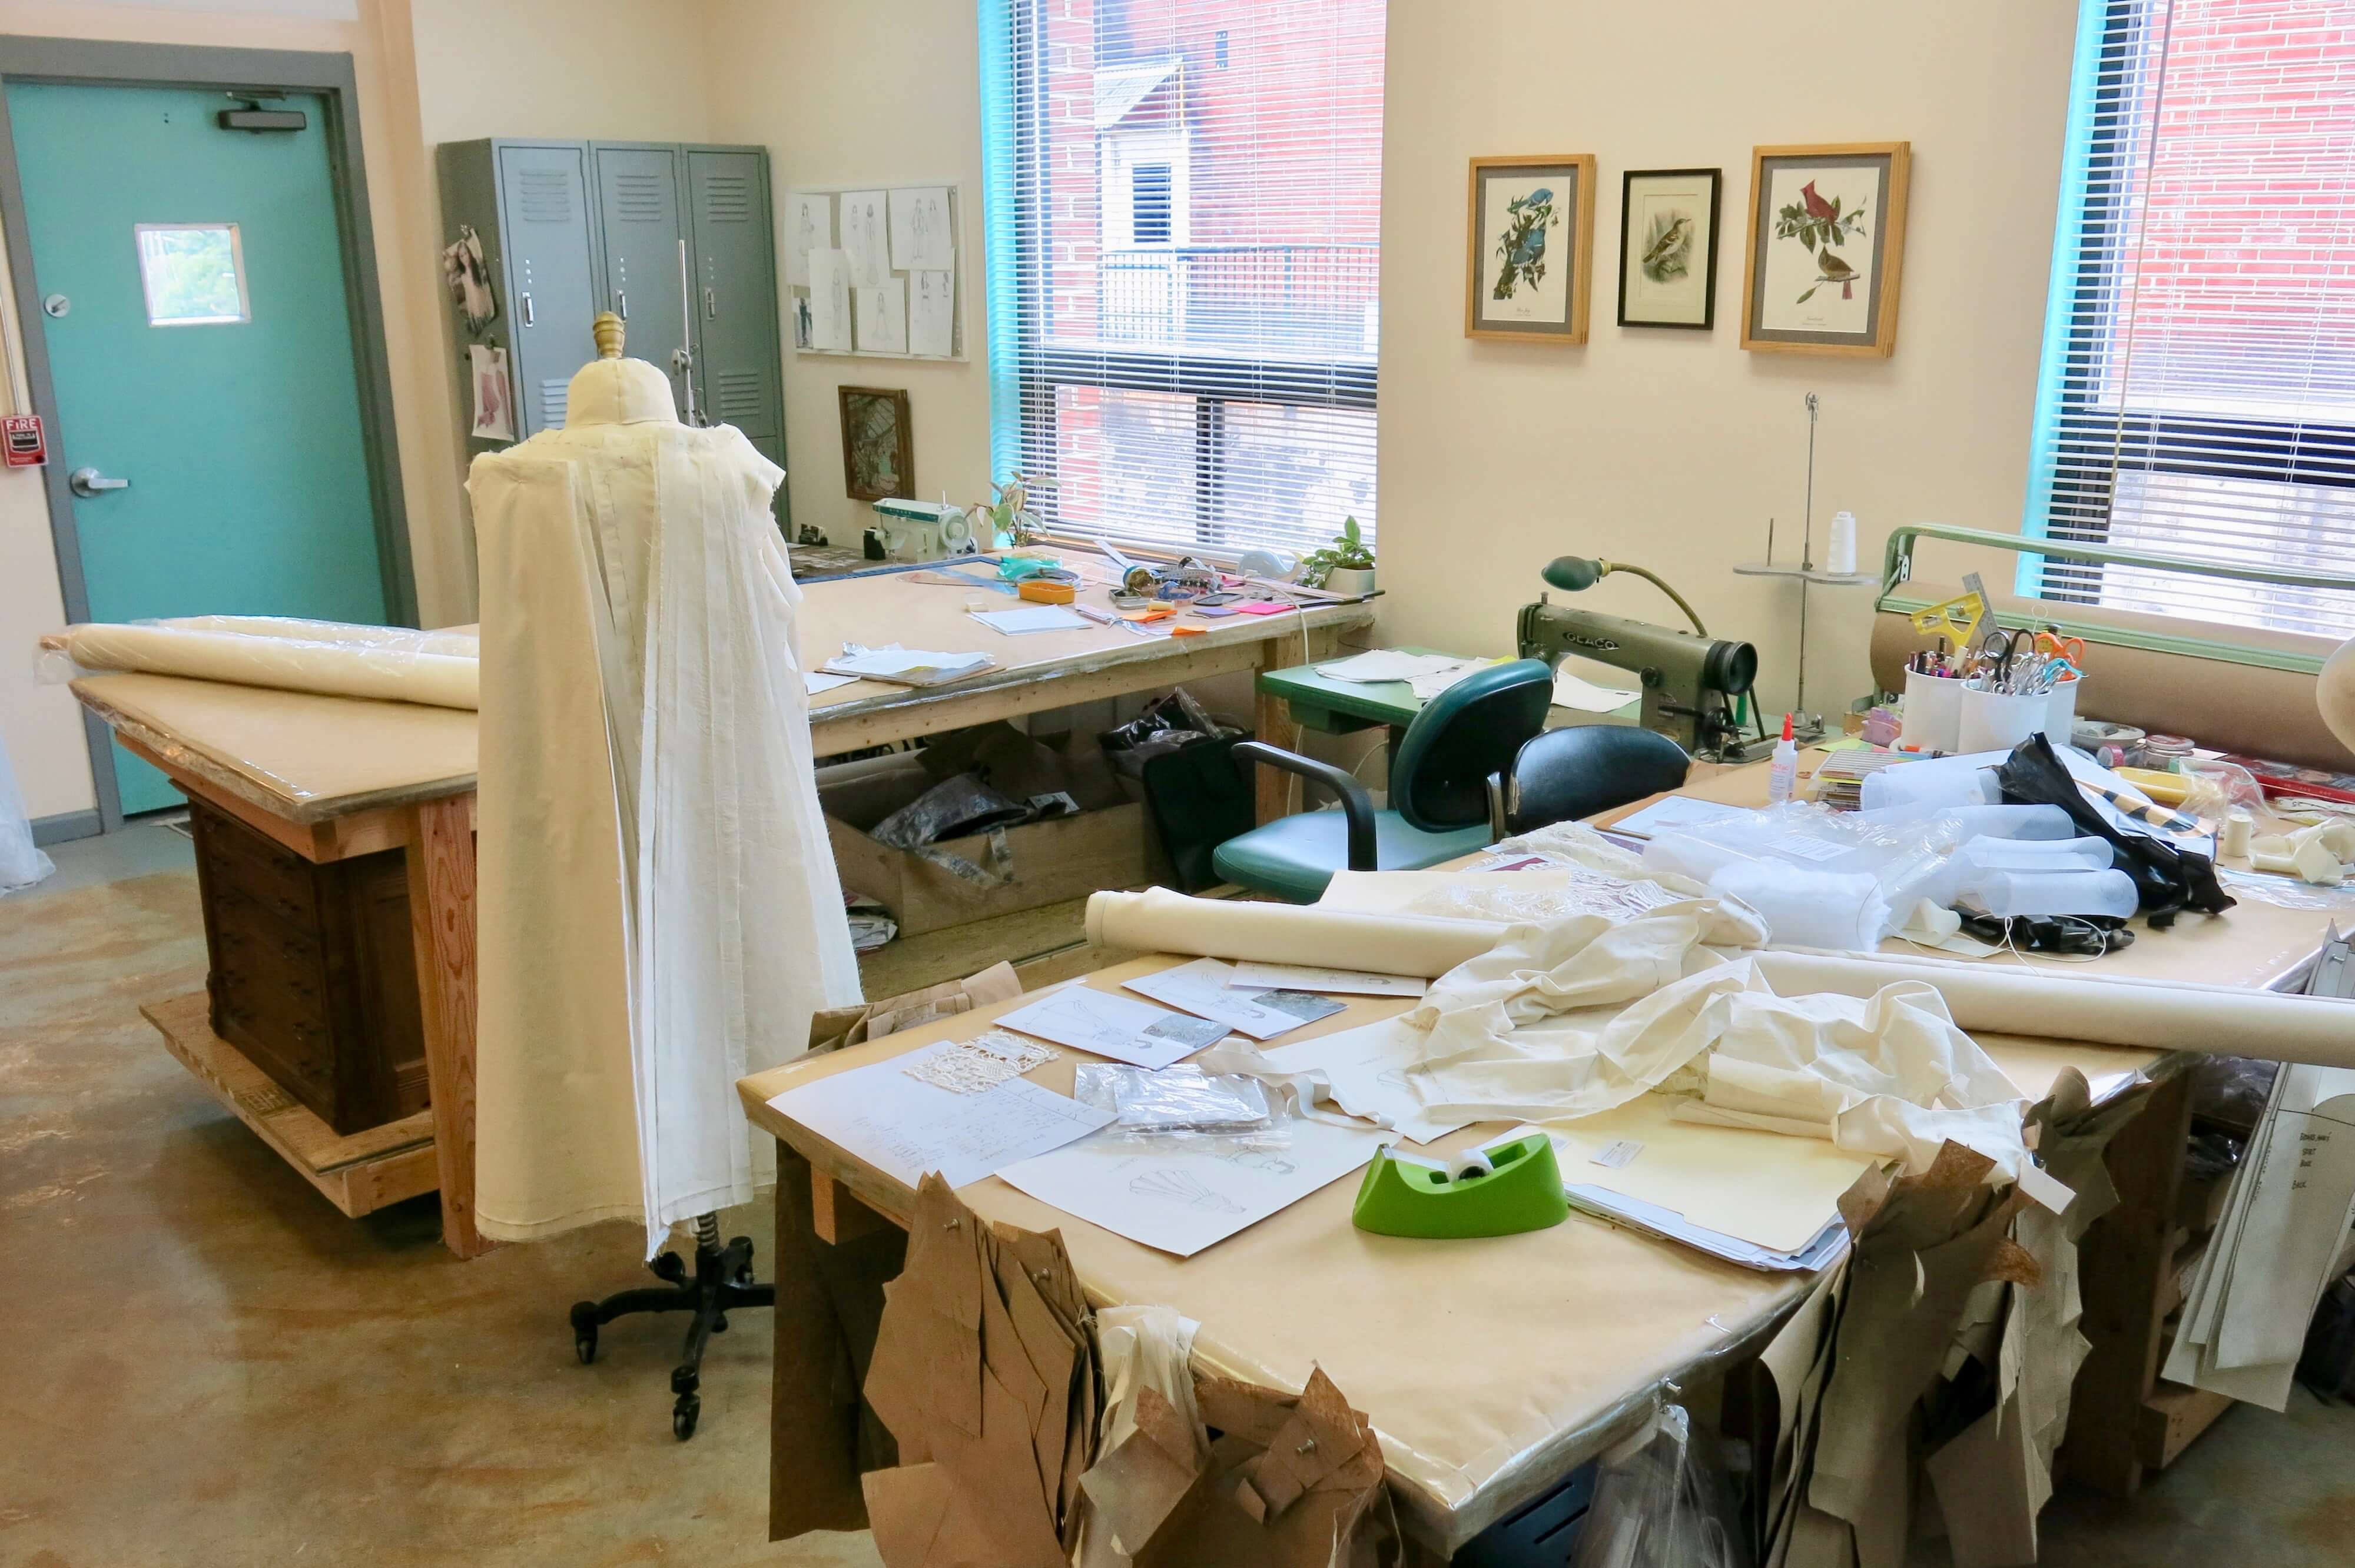 Choosing and Prepping Deborah's Fabrics by Brooks Ann Camper Bridal Couture